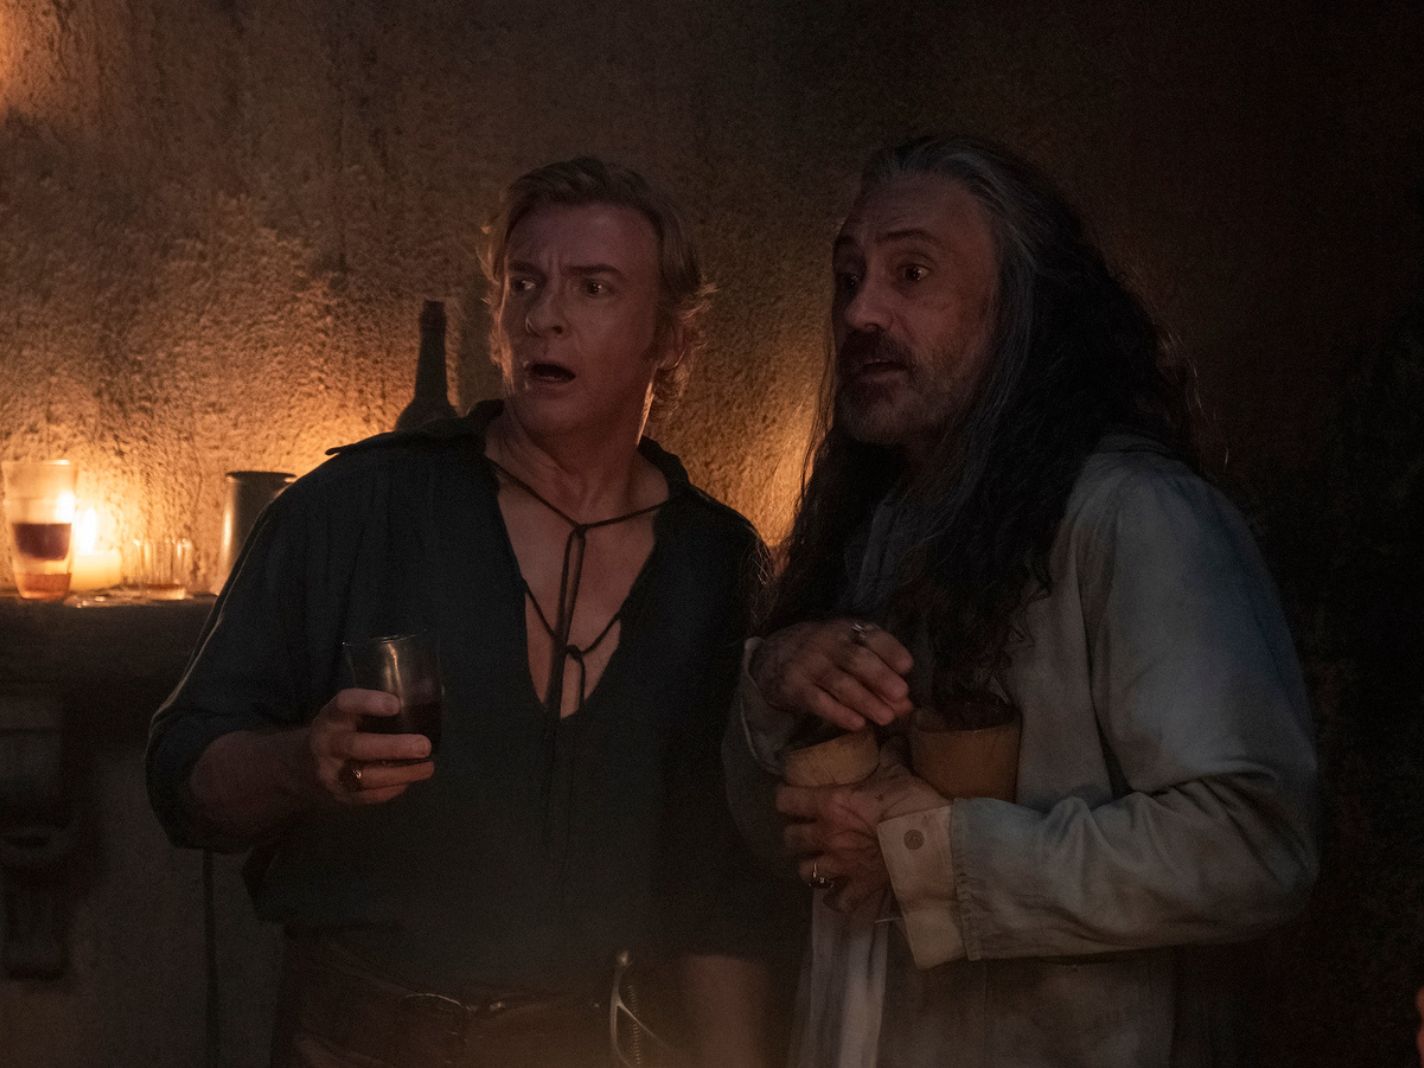 Rhys Darby and Taika Waititi in Our Flag Means Death 2x07 "Man on Fire"